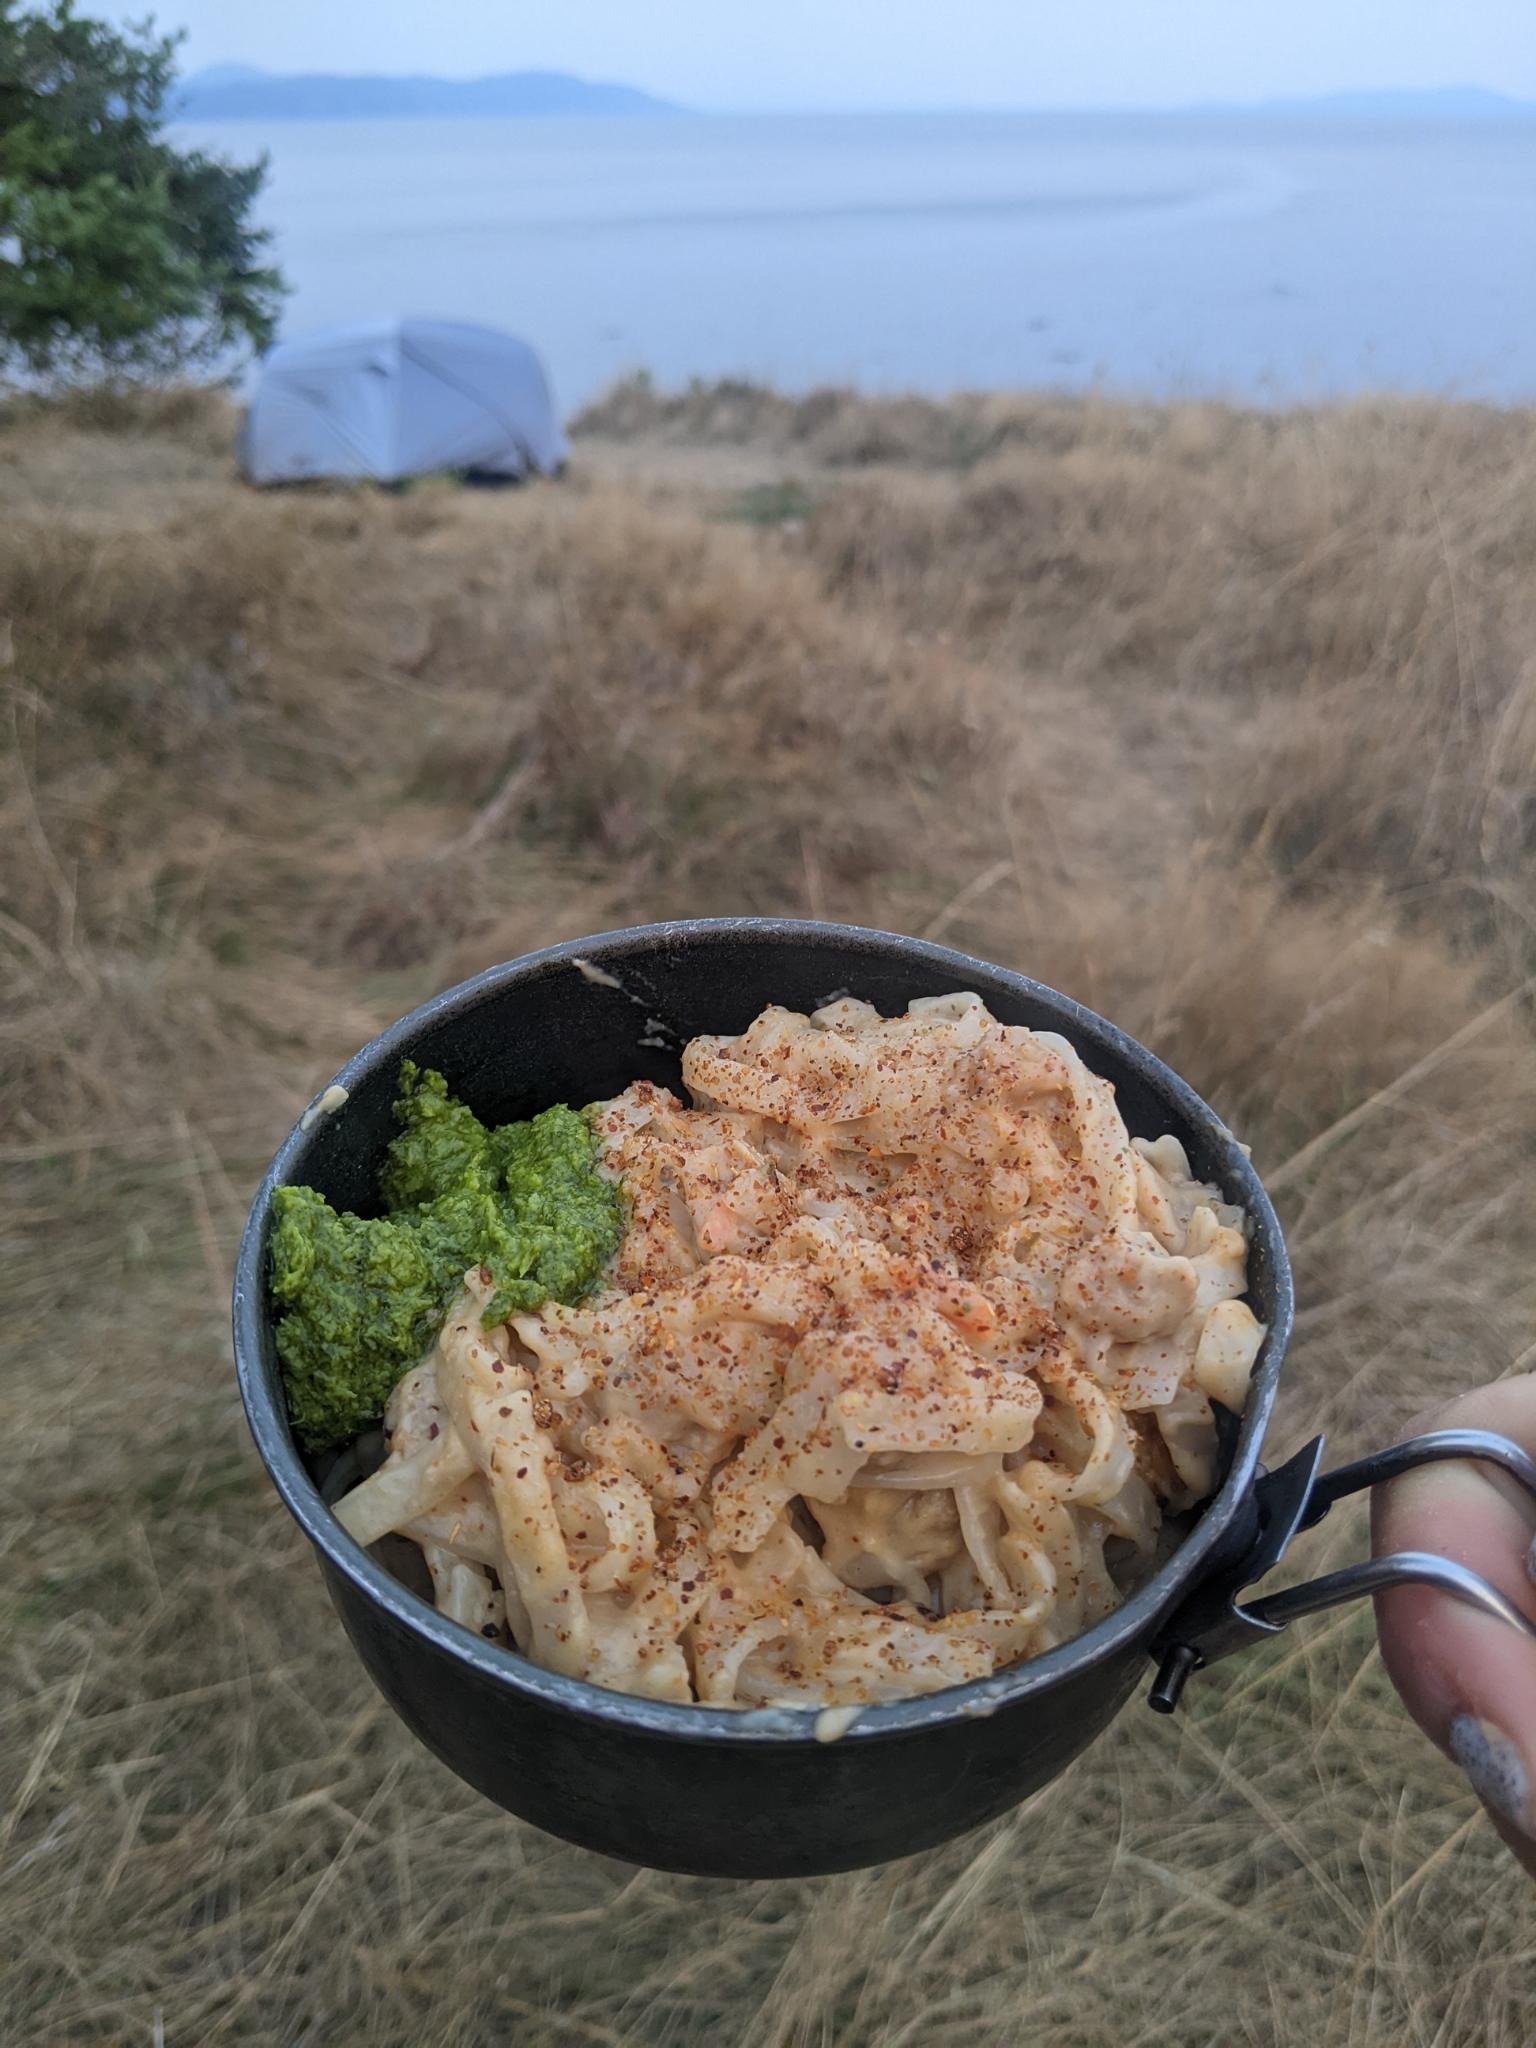 Tangy Saucy Backcountry Pad Thai